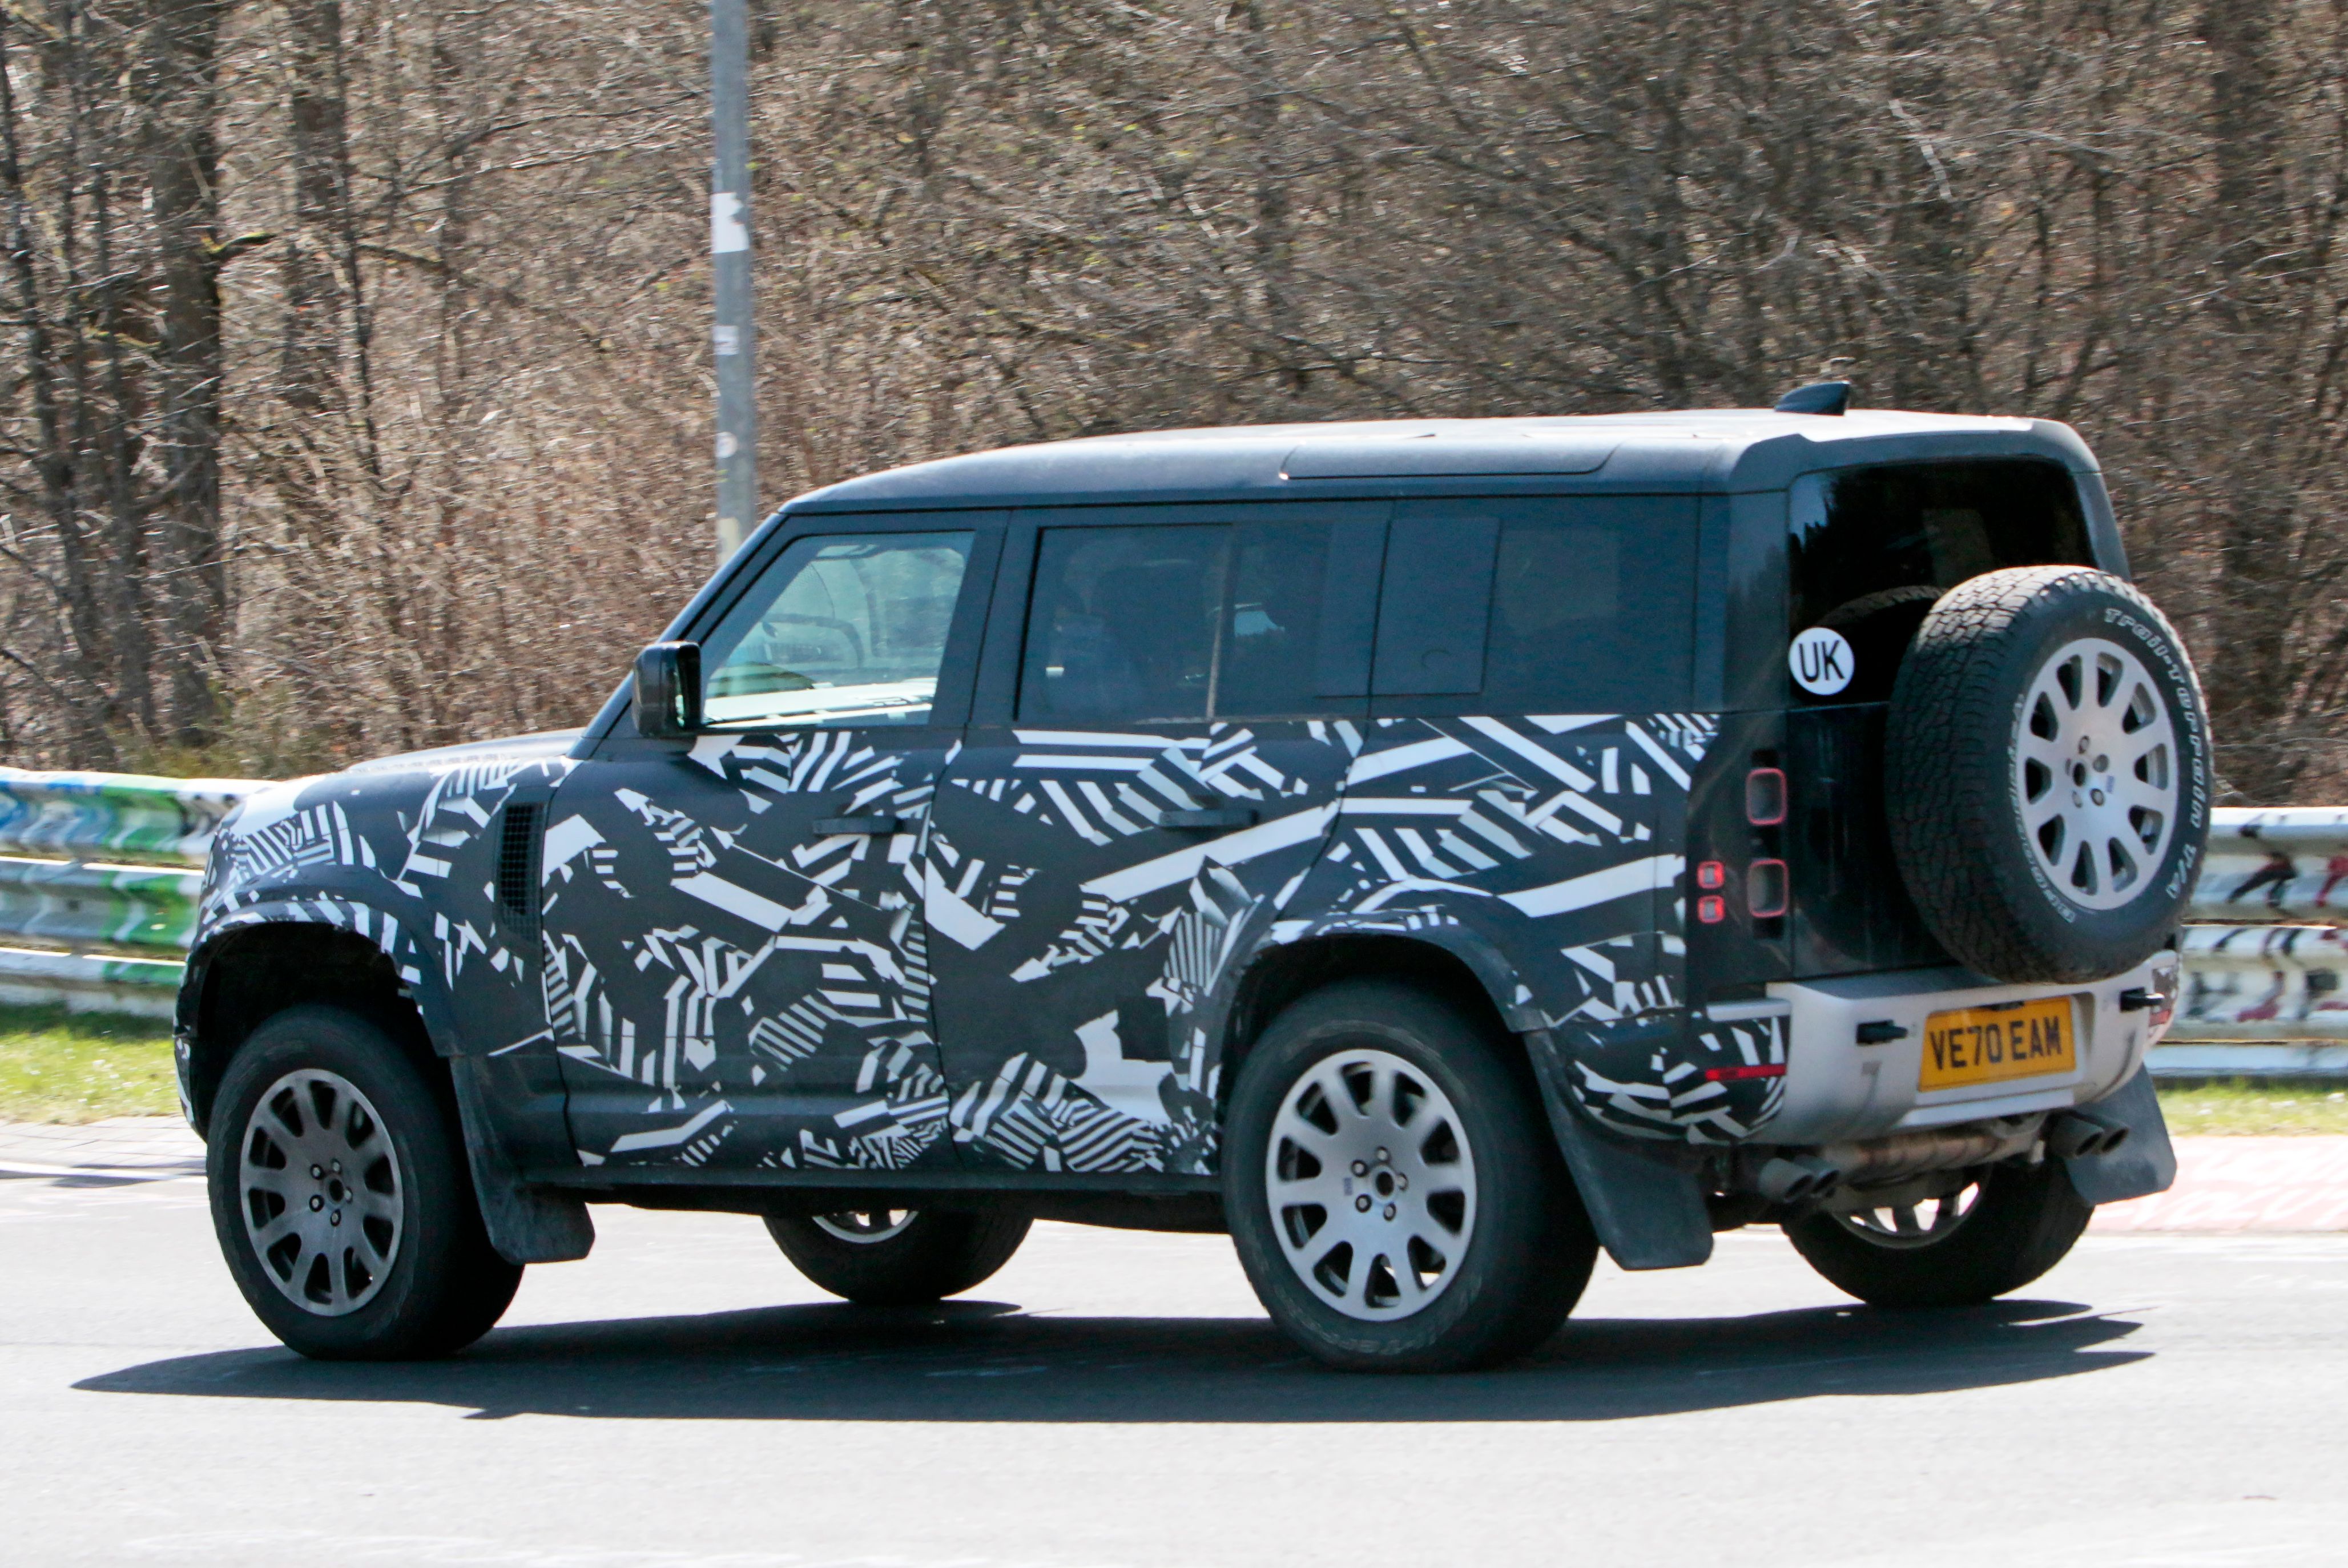 Land Rover Defender SVR Reportedly Coming With 600+ BMW Horsepower